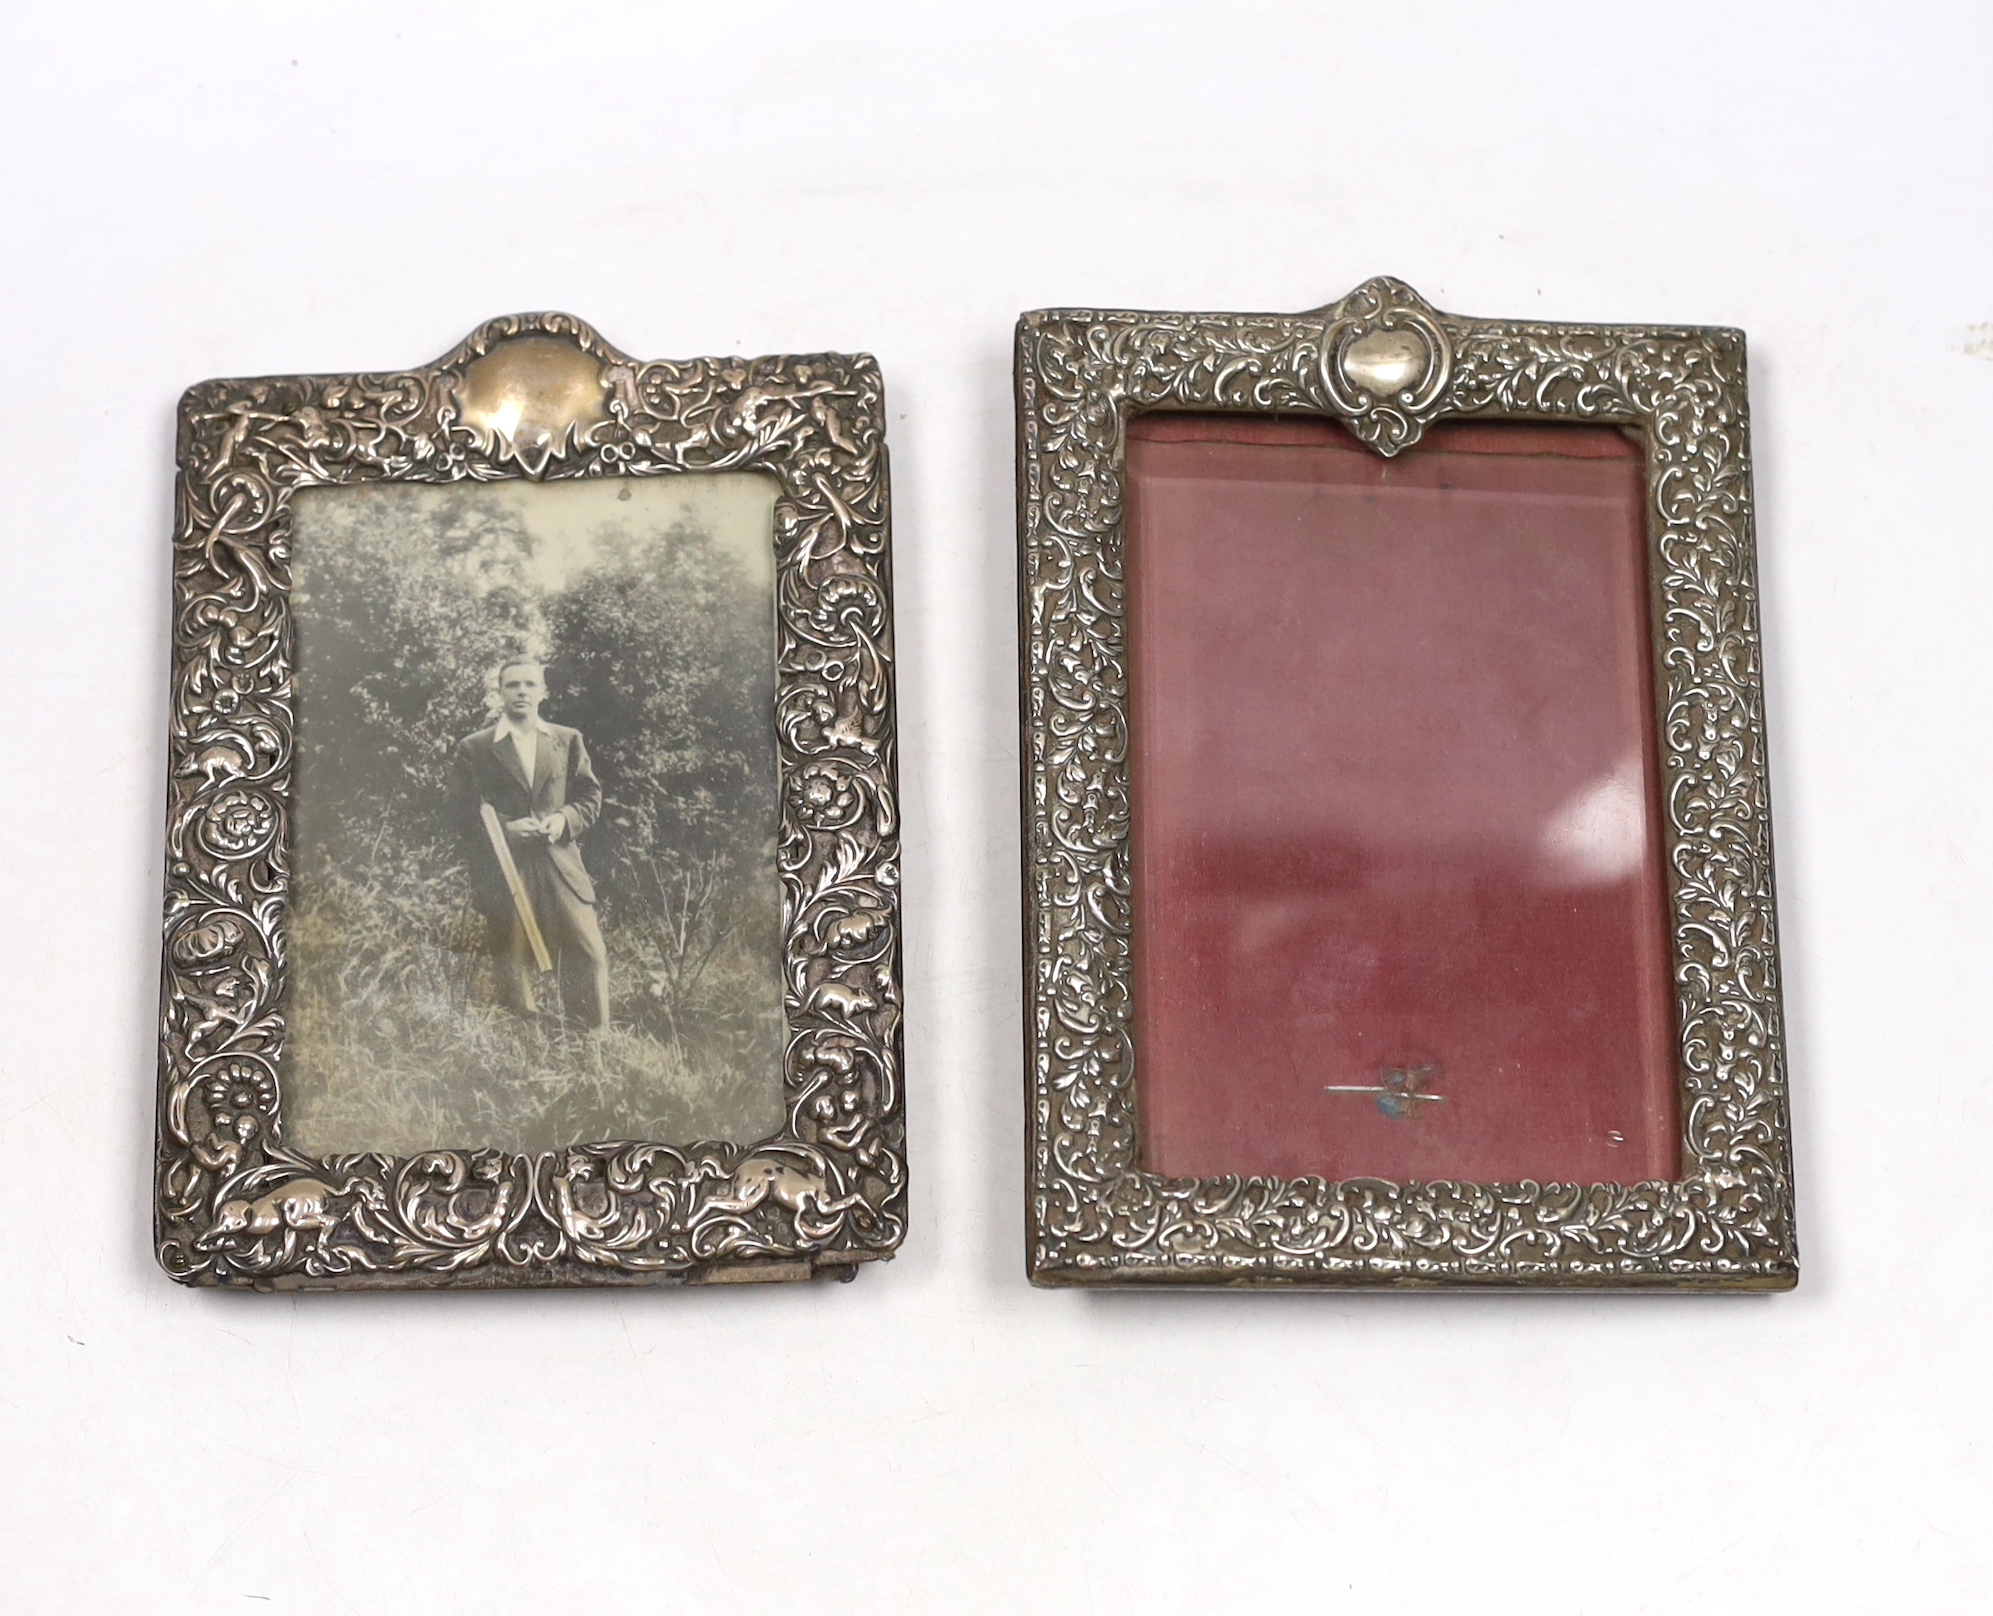 Two early 20th century repousse silver mounted rectangular photograph frames, both approximately 18cm.